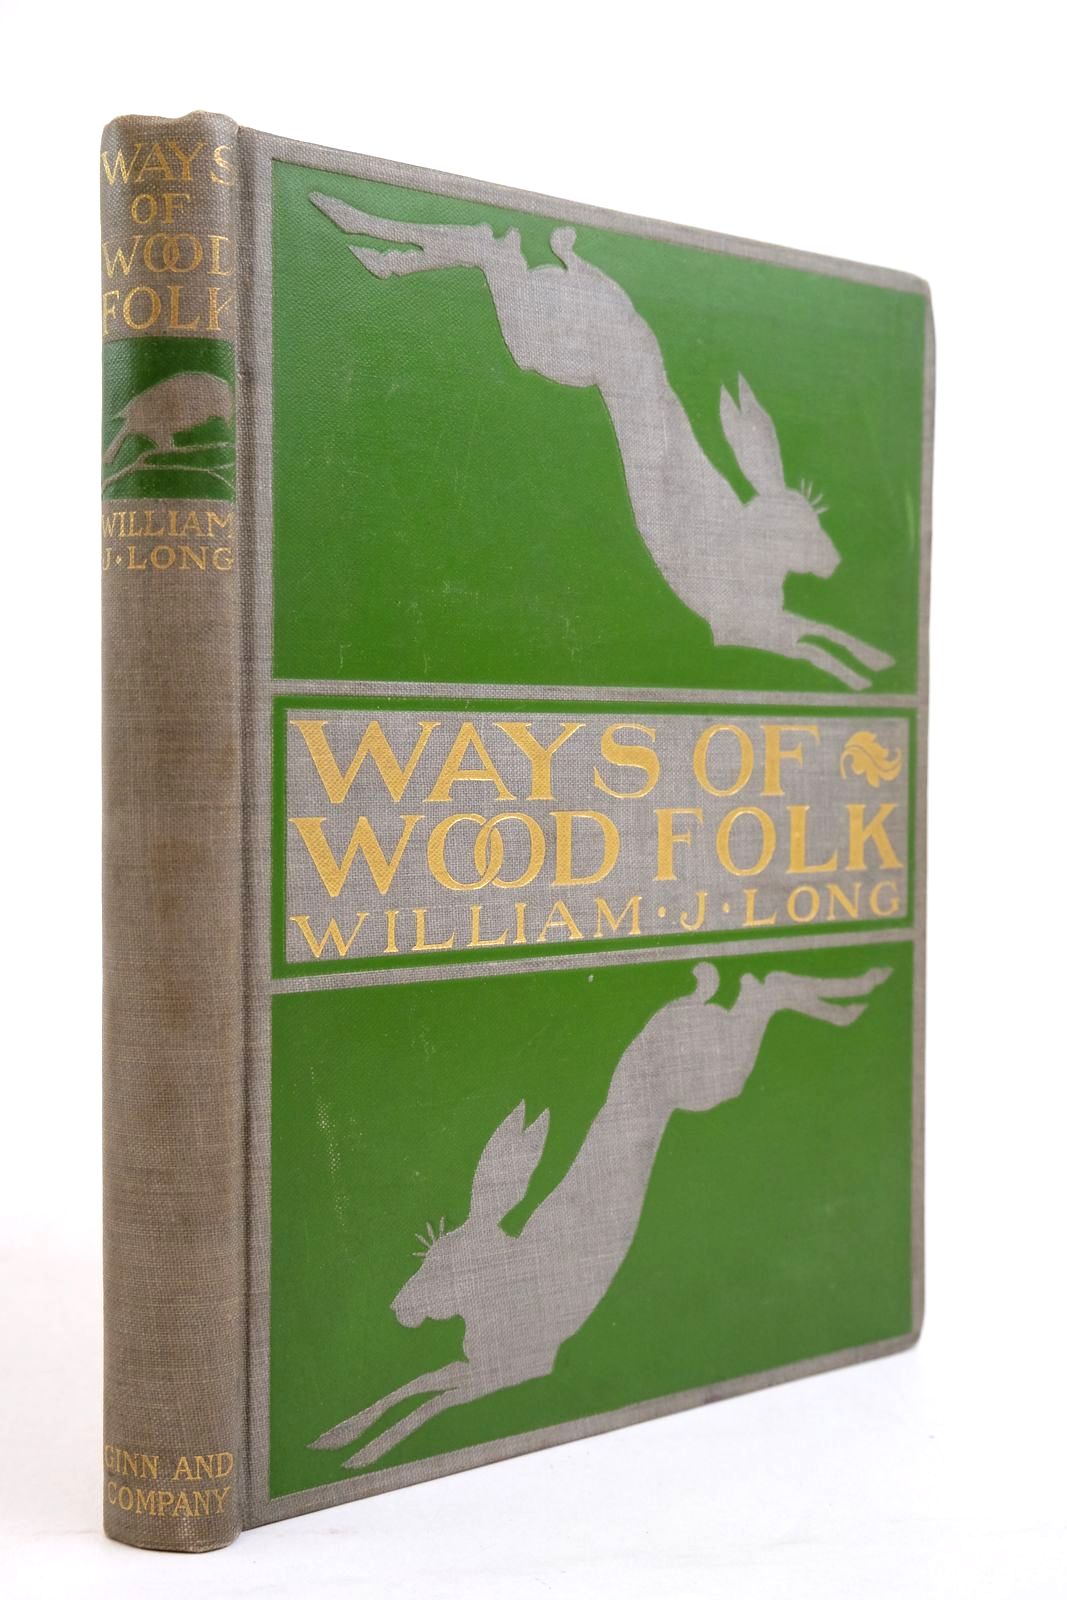 Photo of WAYS OF WOOD FOLK written by Long, William J. published by Ginn and Company (STOCK CODE: 2134627)  for sale by Stella & Rose's Books